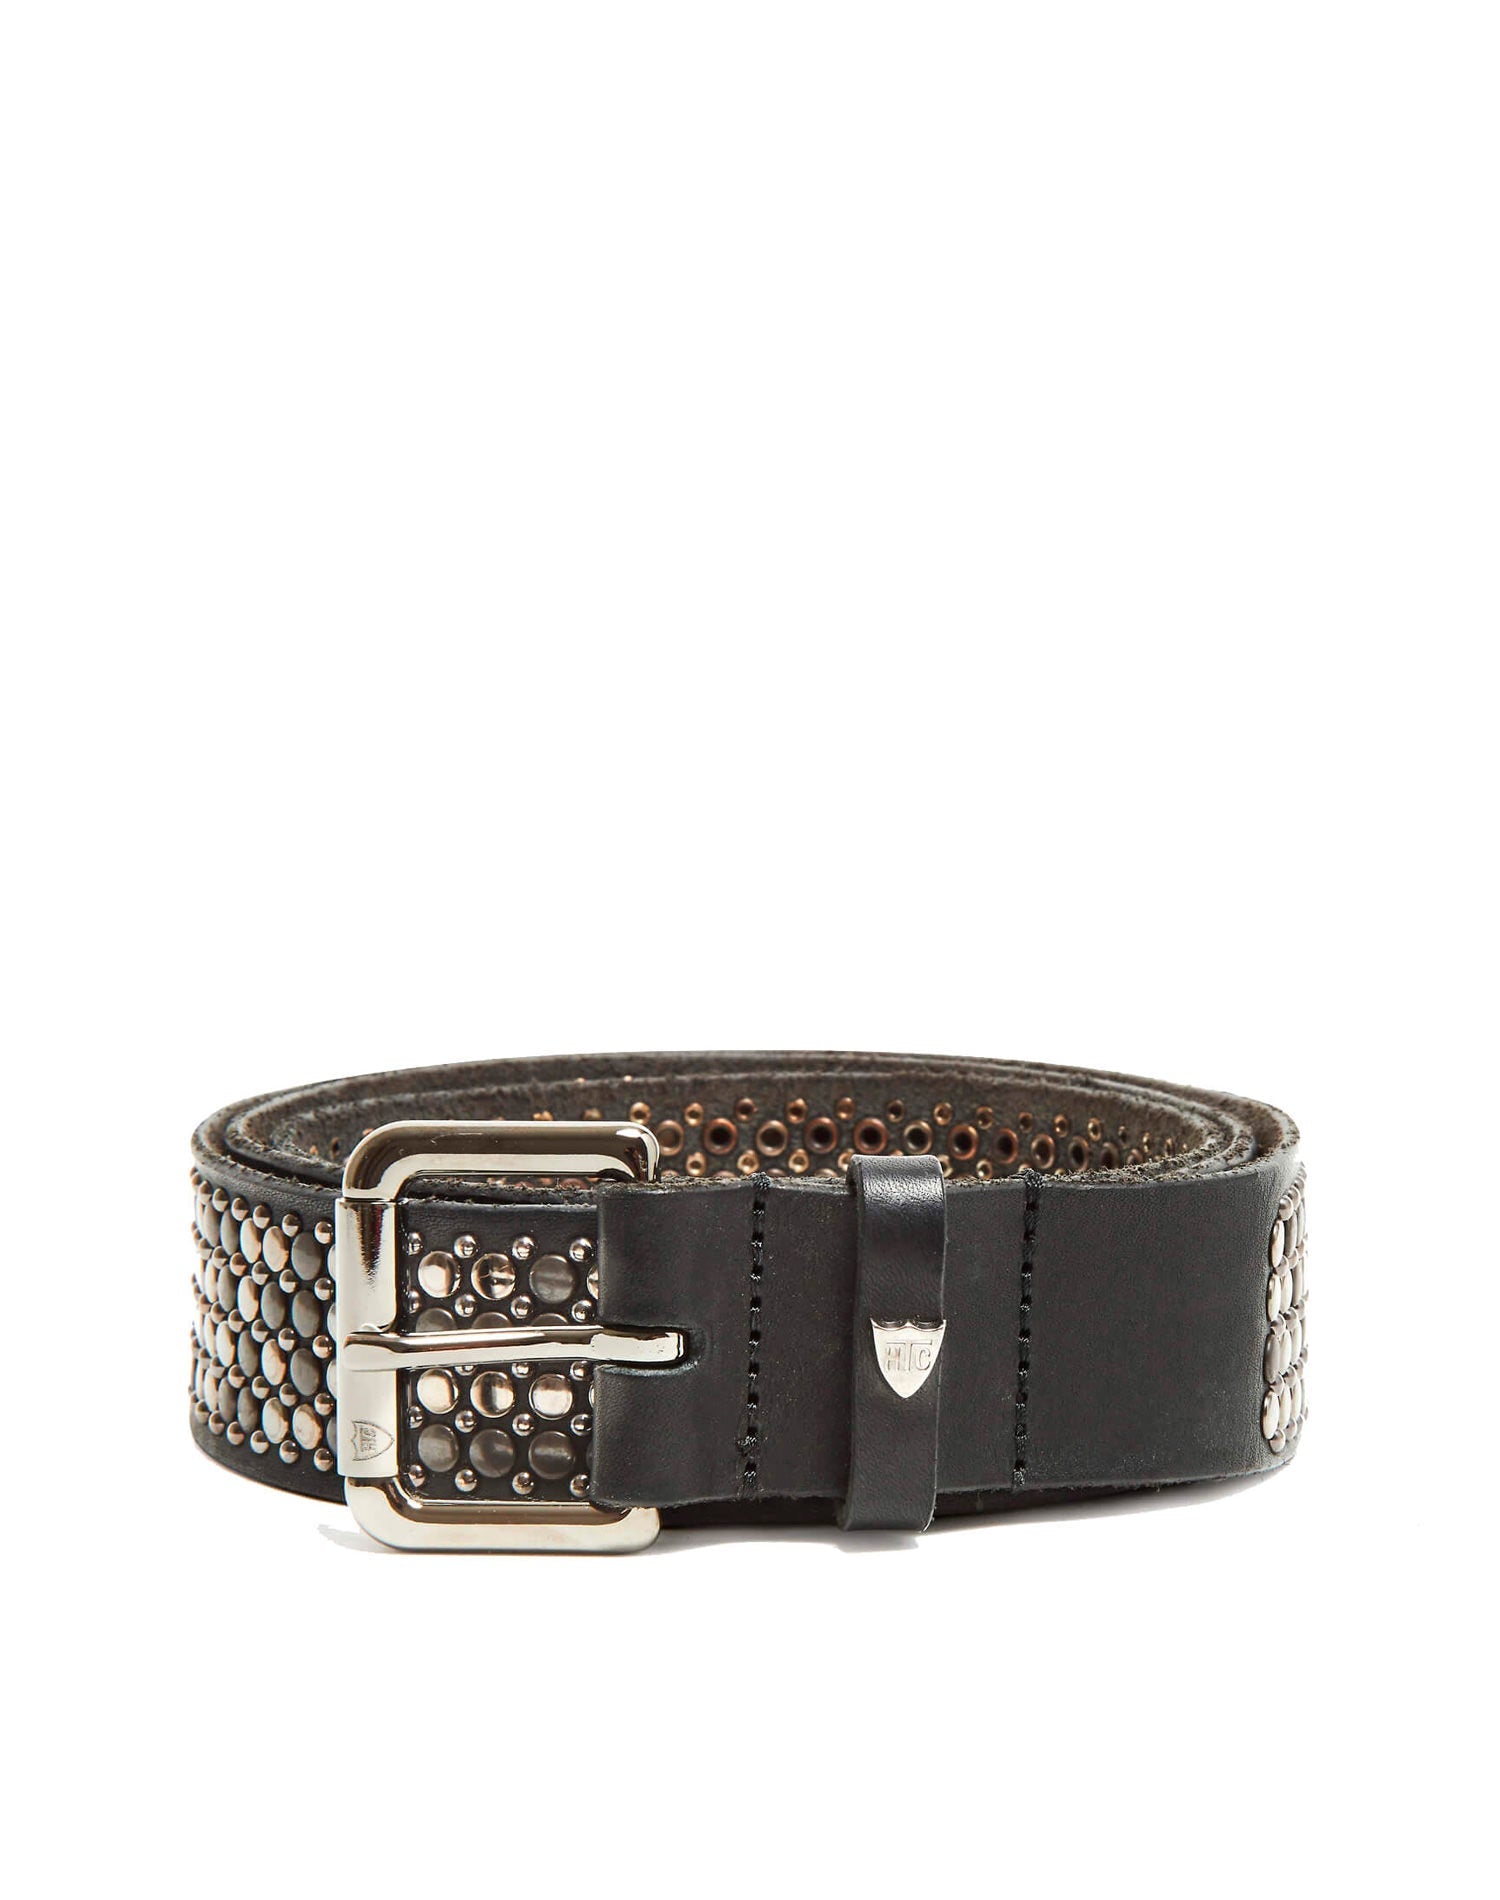 NEST BELT Black studded leather belt, metal buckle, loop with logo. Made in Italy. Height: 3.5 cm HTC LOS ANGELES